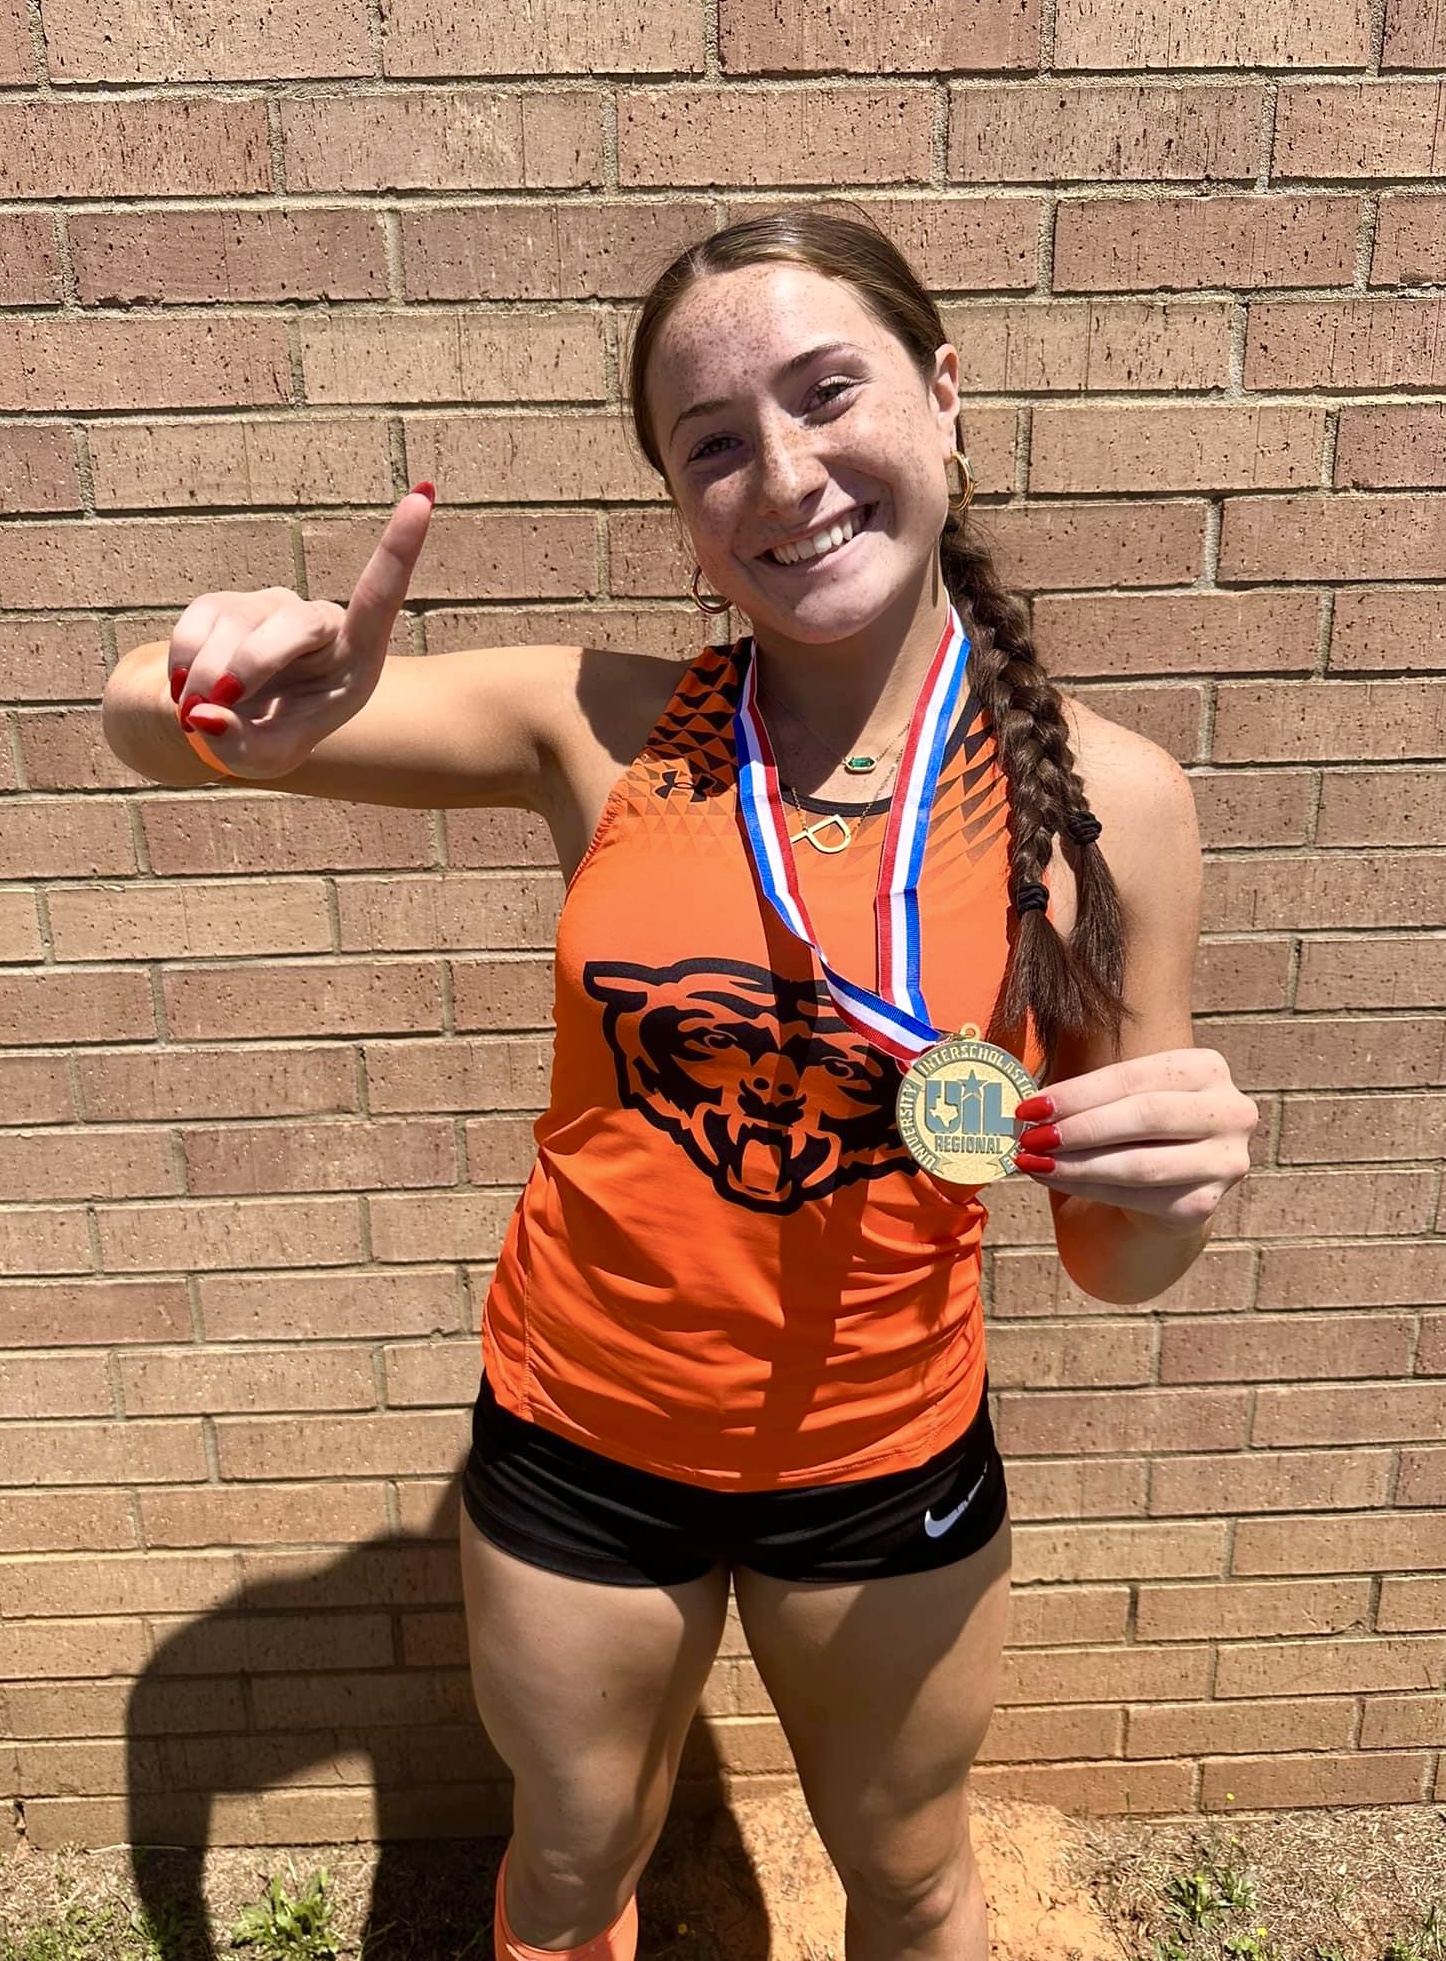 Gladewater's Peyton Hunter, pictured here after winning the 100 meter dash at the regional meet at Whitehouse. Hunter won something bigger than that: she won two SILVER medals at the UIL State Track & Field Championships in Austin last week! Peyton and Kilgore's Braydon Nelson (pictured below, on the medal stand) are this week's Whataburger / ETBlitz.com Players of the Week! (Above photo courtesy of GLADEWATER ATHLETICS FACEBOOK PAGE; photo below courtesy of T.J. GILLEN-HALL)